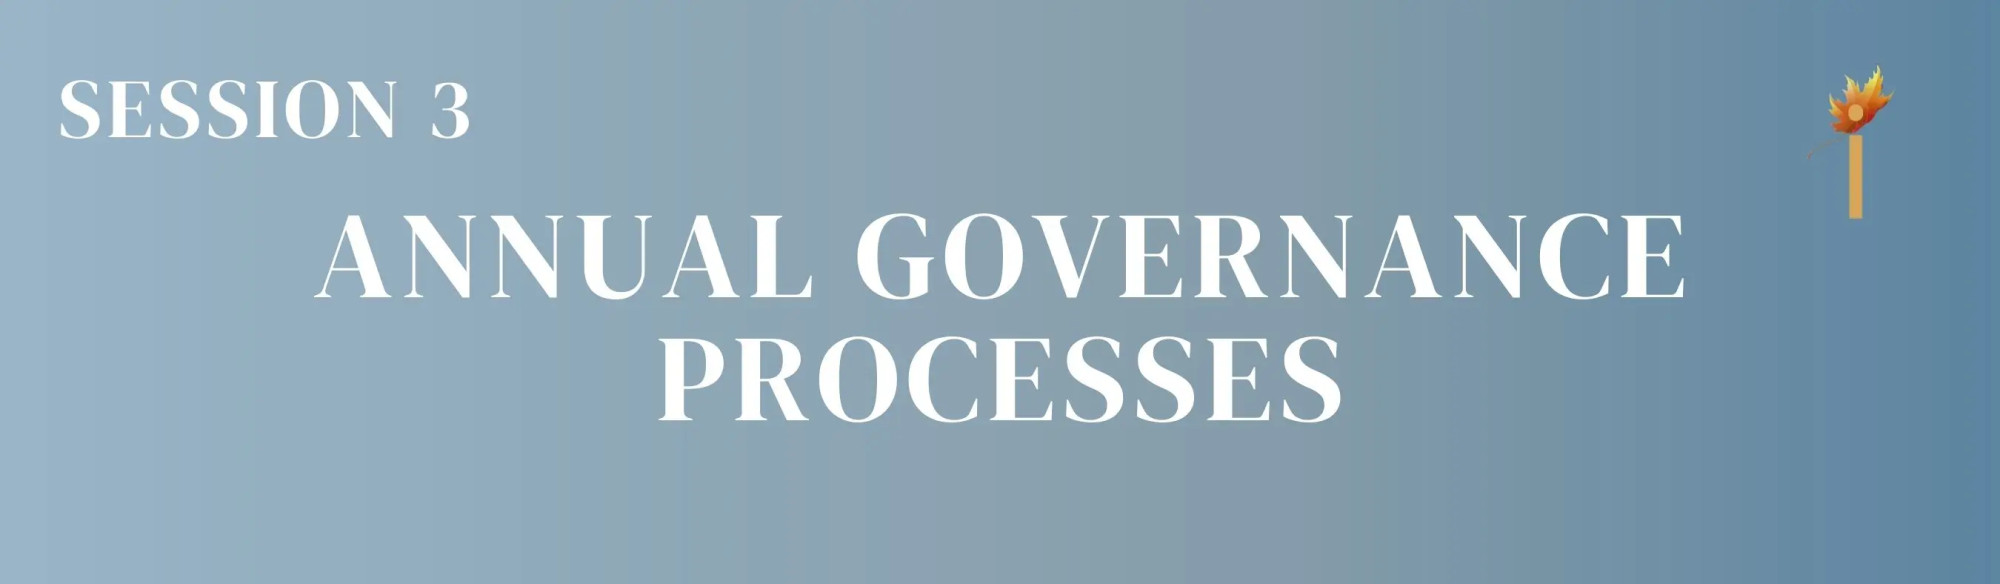 Annual Governance Processes